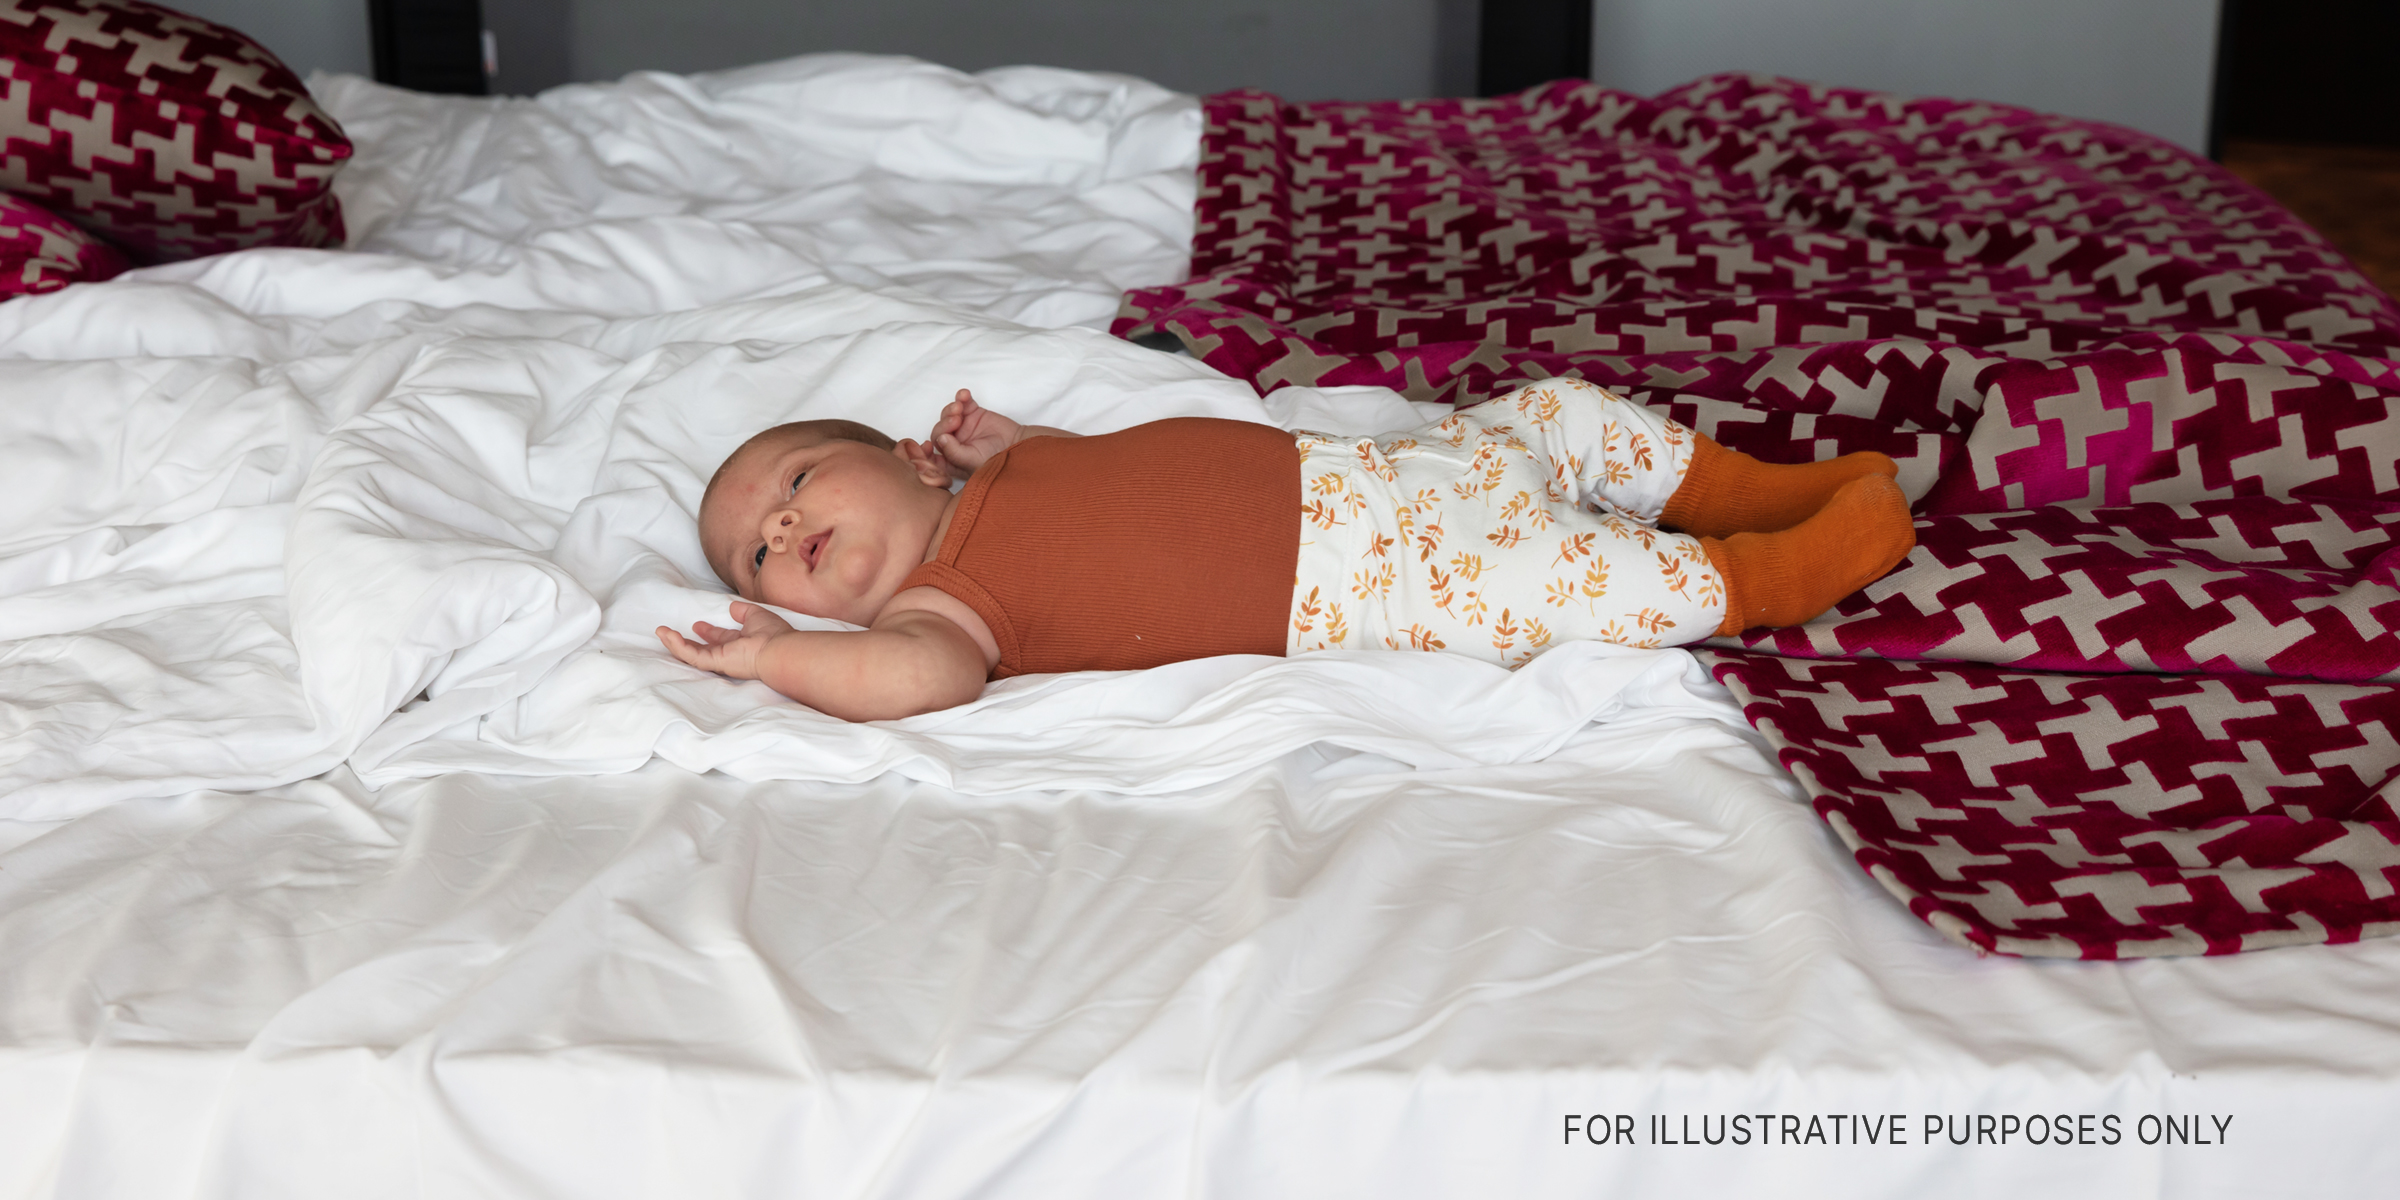 Baby lying on bed | Source: Shutterstock